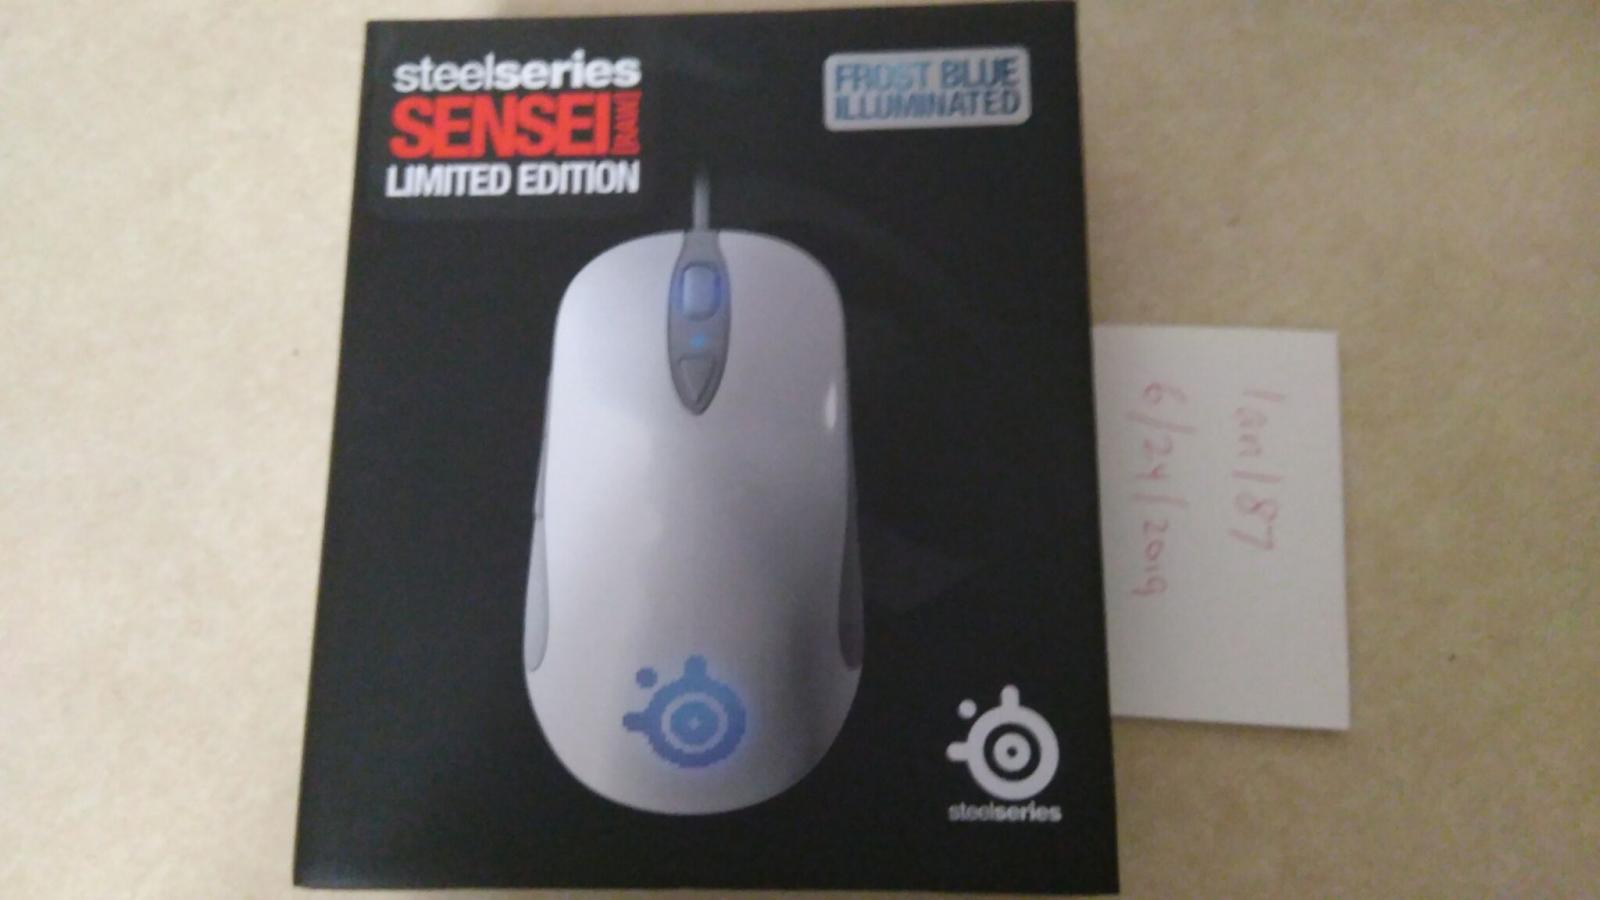 For sale Steel Series Sensei Frost Blue Illuminated Limited Edition Mouse